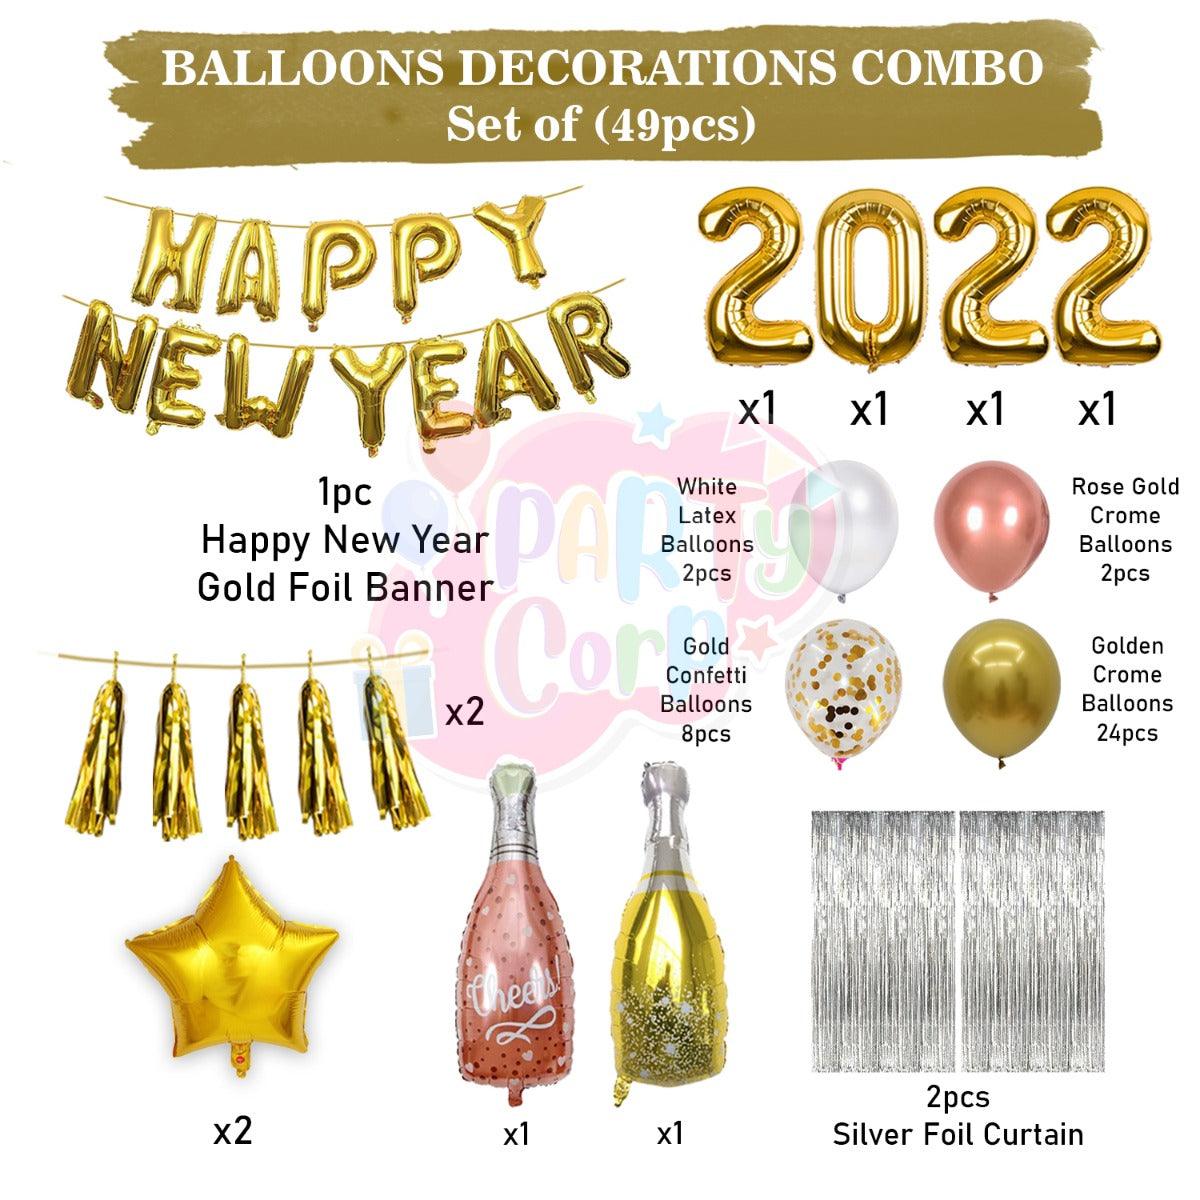 PartyCorp New Year Decoration Kit Combo 49 Pcs - Gold, Rose Gold, White, Gold Confetti Chrome Balloon, Gold HNY Banner, Silver Curtain, Gold Tassels, (Gold Star,2022 Digit,Wine,Champagne Bottle) Foils